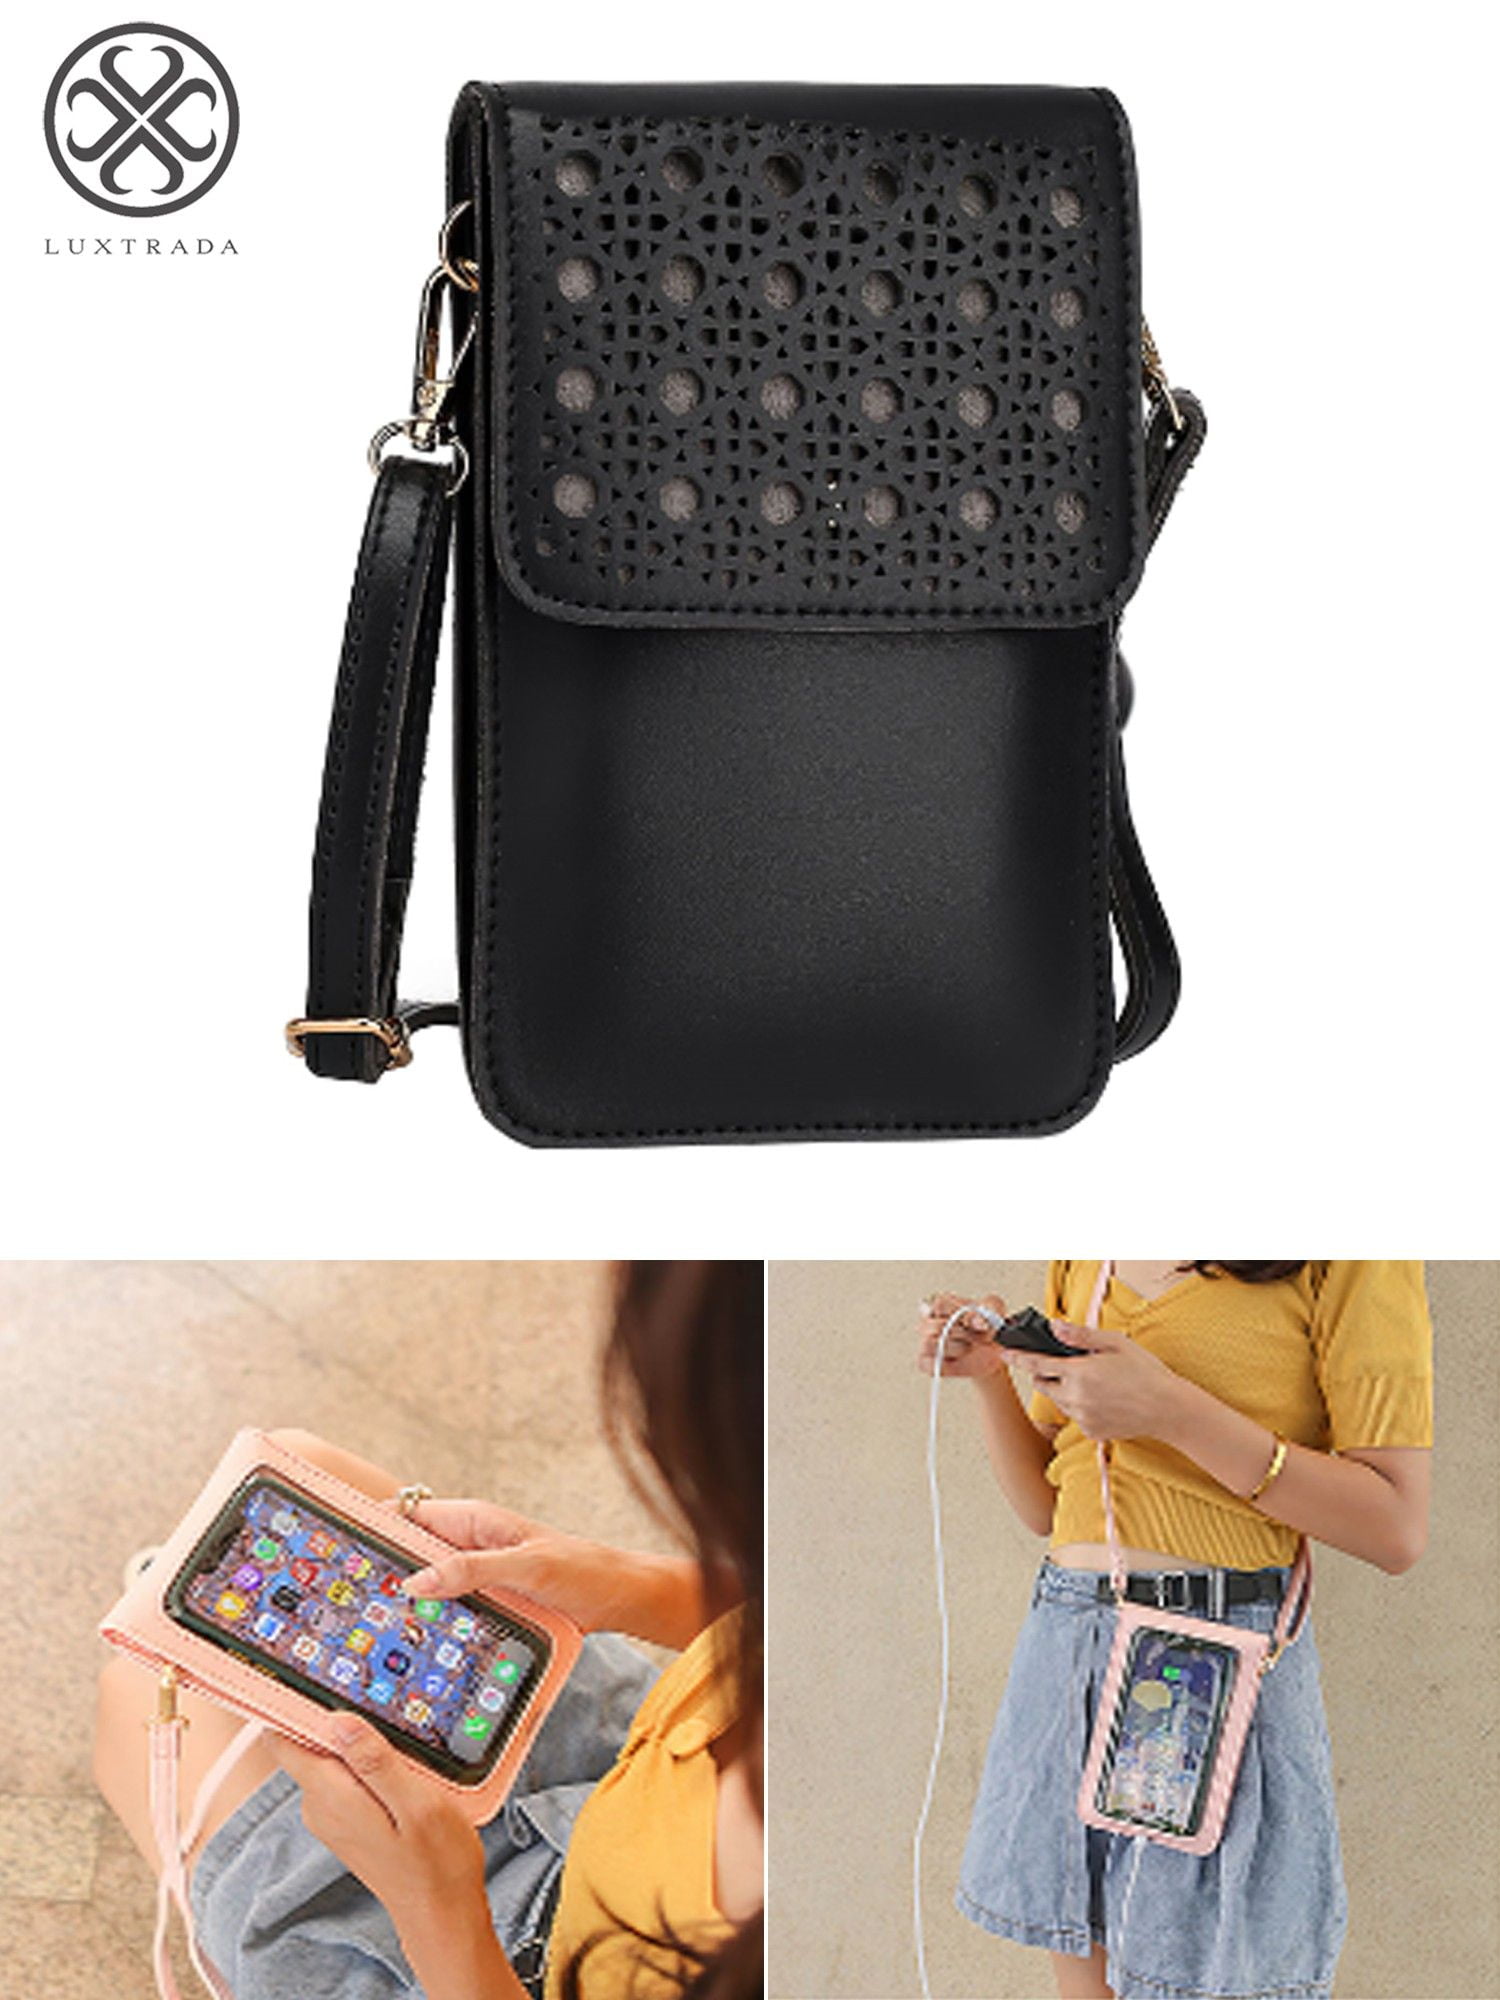 NEW Touch Screen Cell Phone Purse Women Bags Soft Leather Wallets Crossbody  Shoulder Strap Handbag for Female Cheap Women's Bags - AliExpress